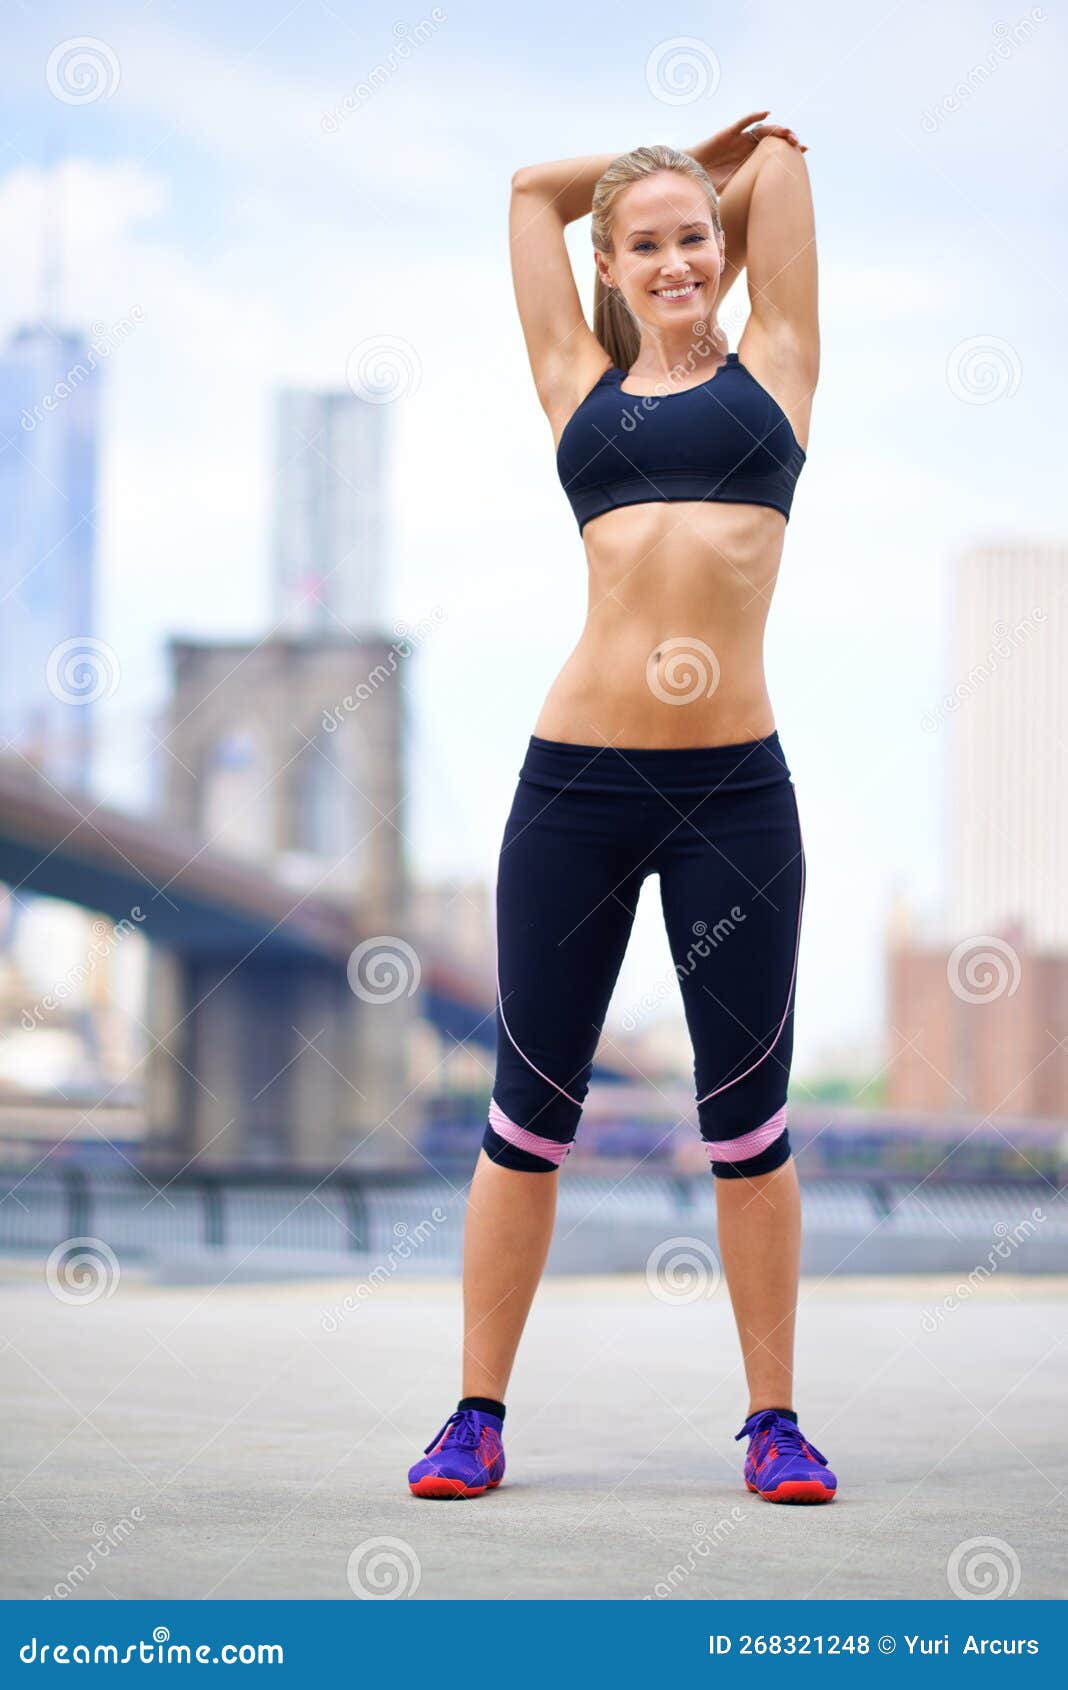 Fitness Enthusiast. Portrait of a Beautiful Woman Stretching